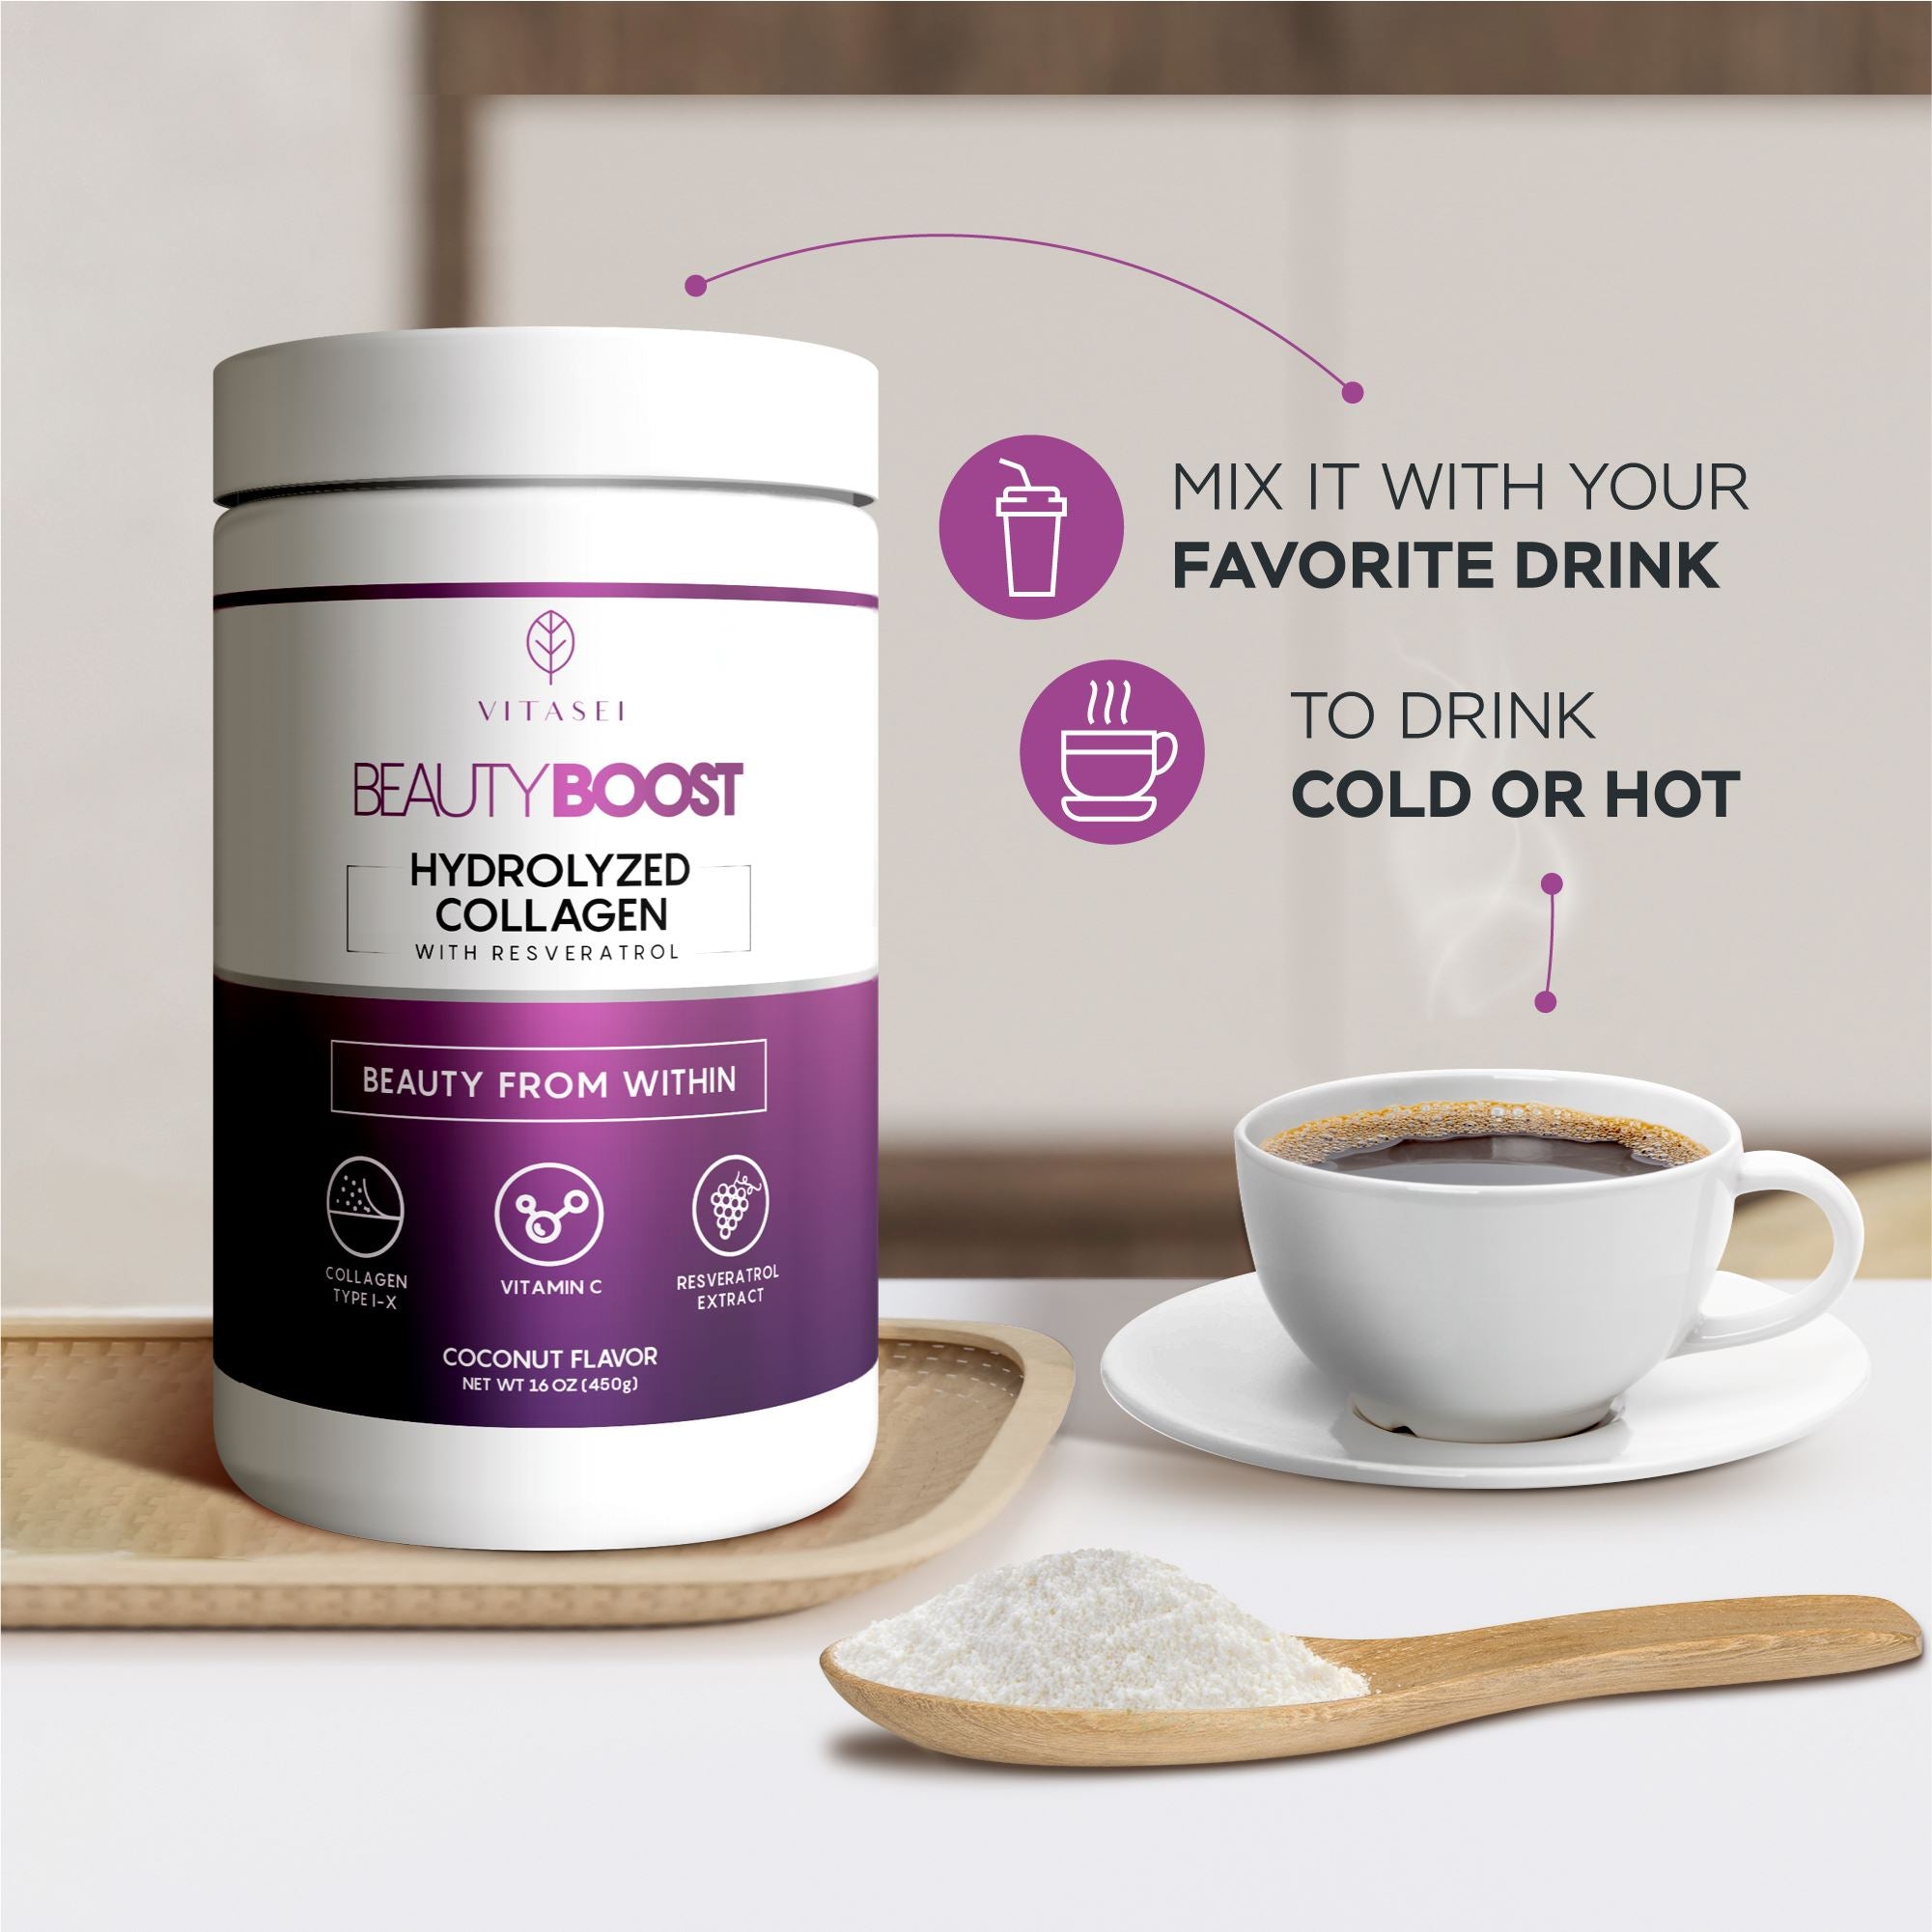 Combo Hydrolyzed Collagen With Resveratrol X2 *(Flavored And Unflavored) + Hydrolized Collagen Capsules Free